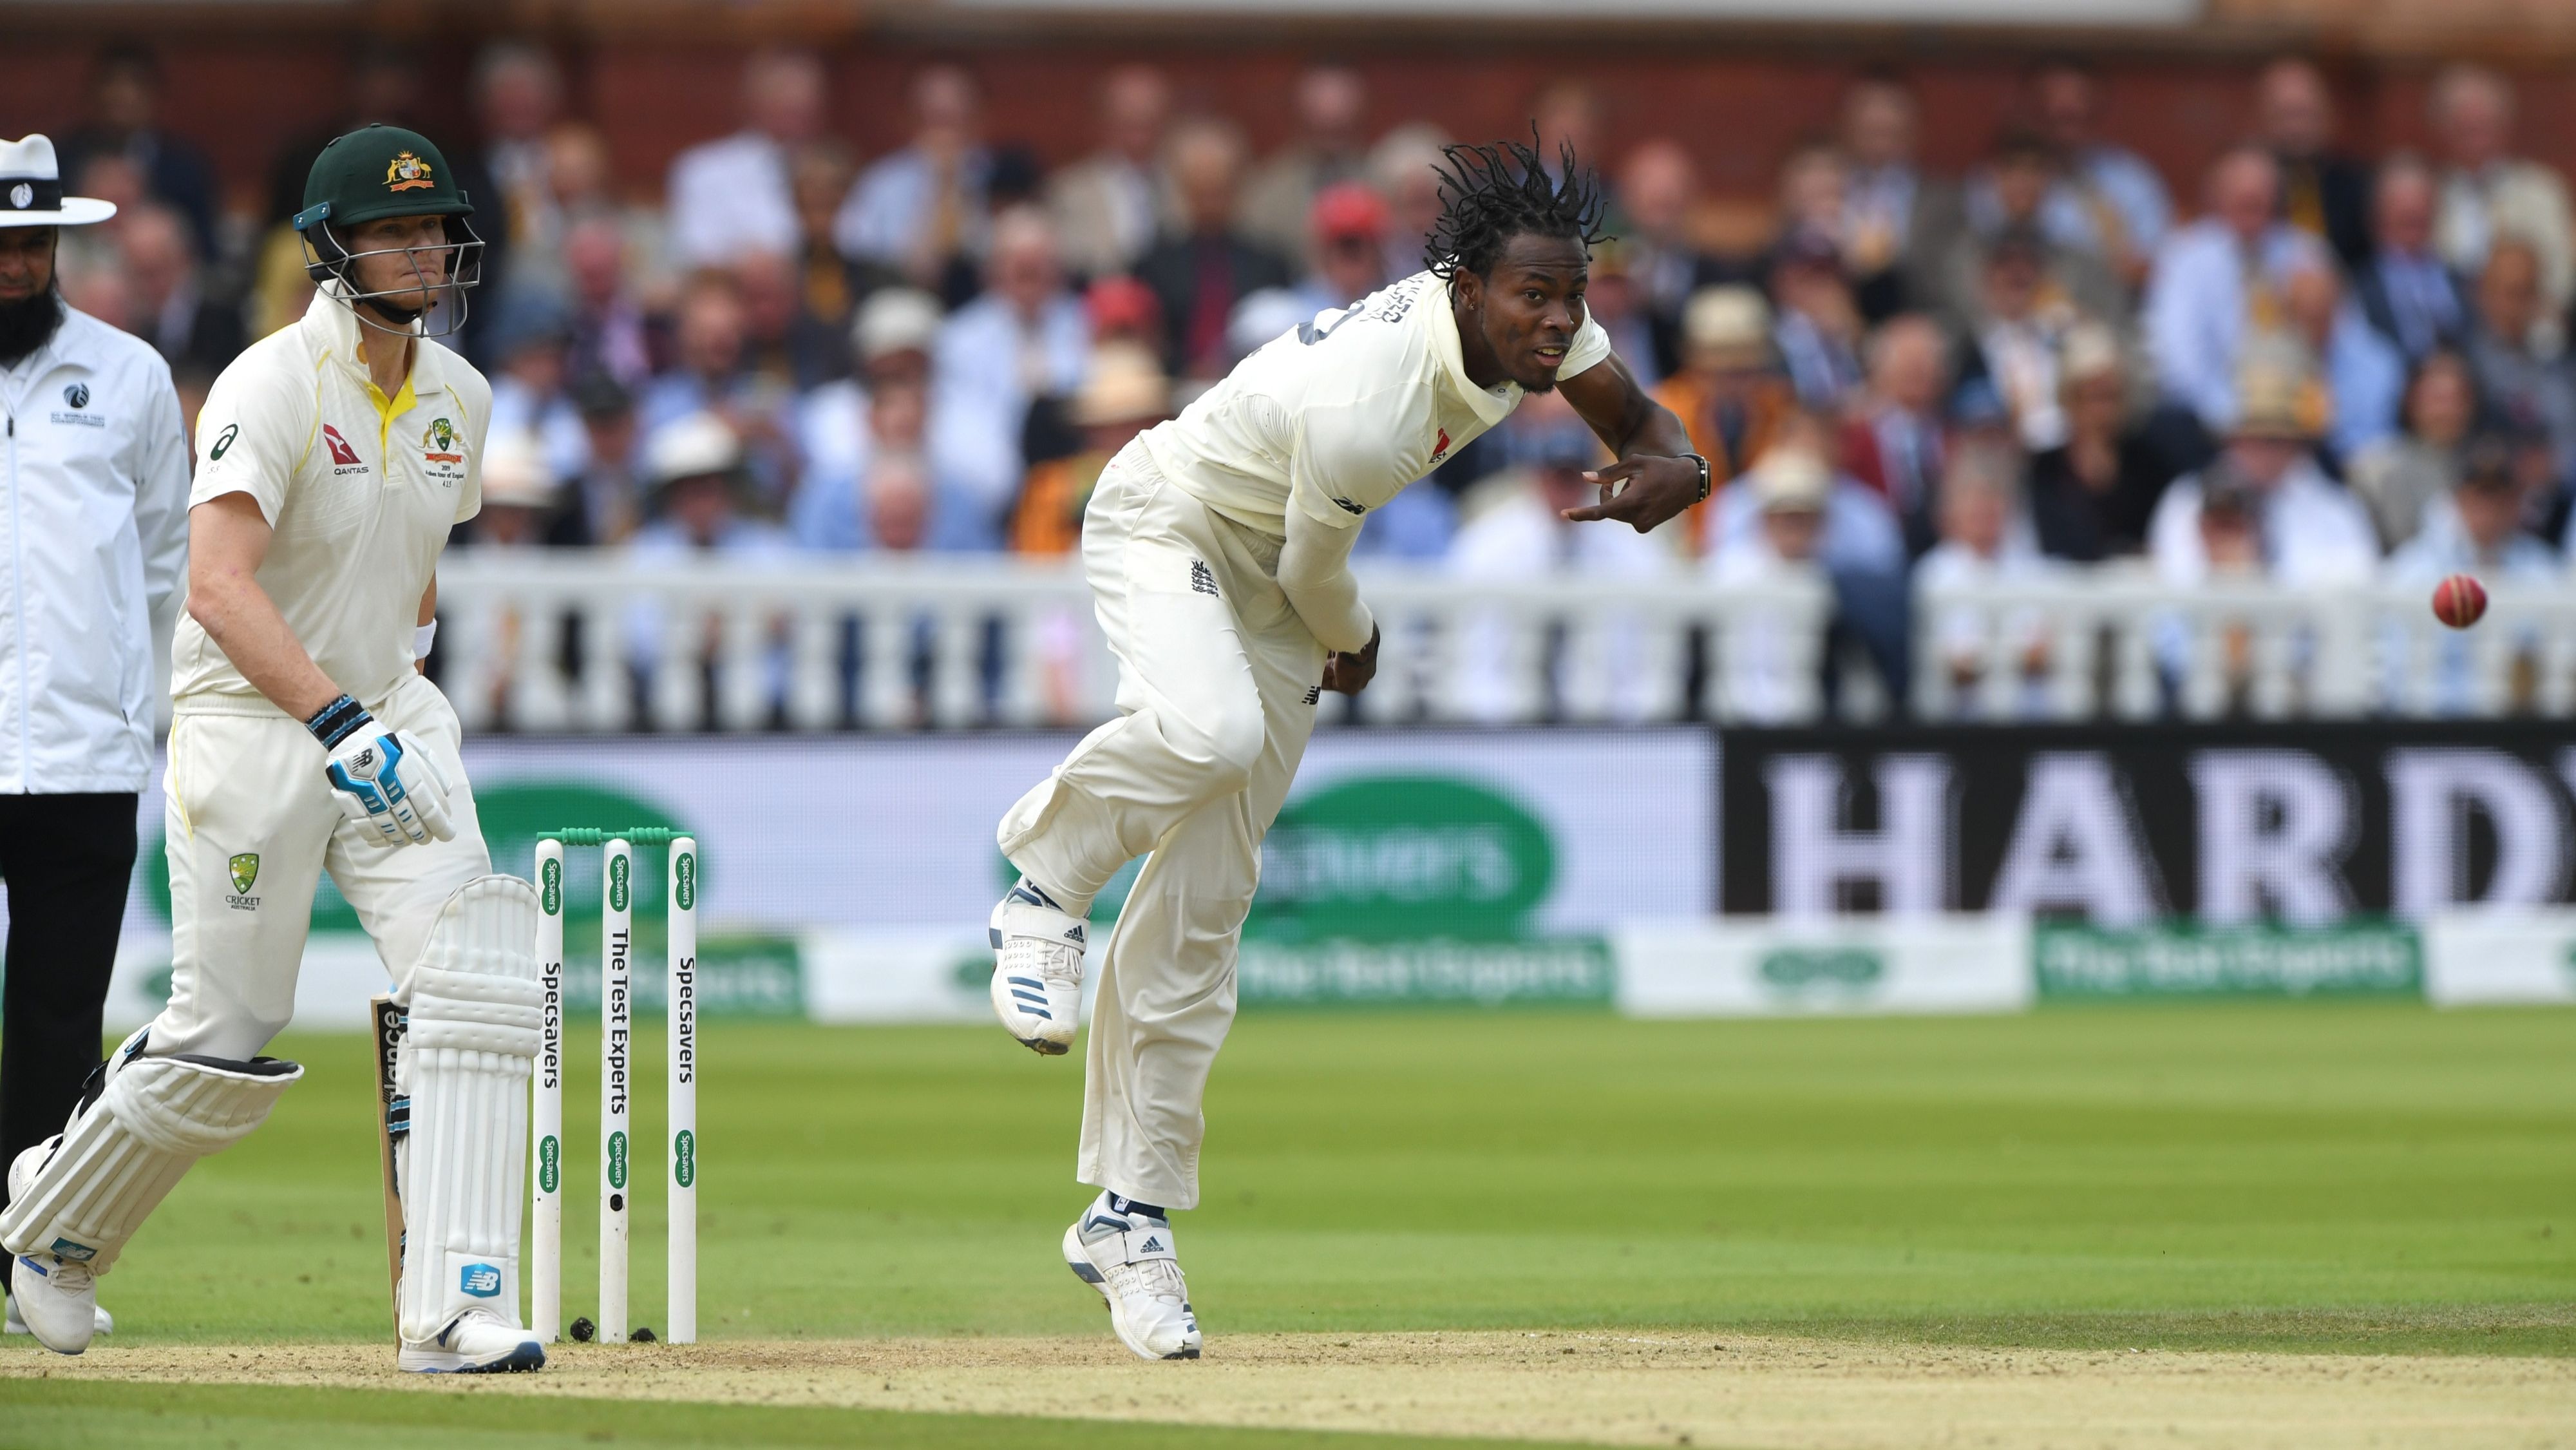 England bowler Jofra Archer has impressed in his first two matches in Test cricket